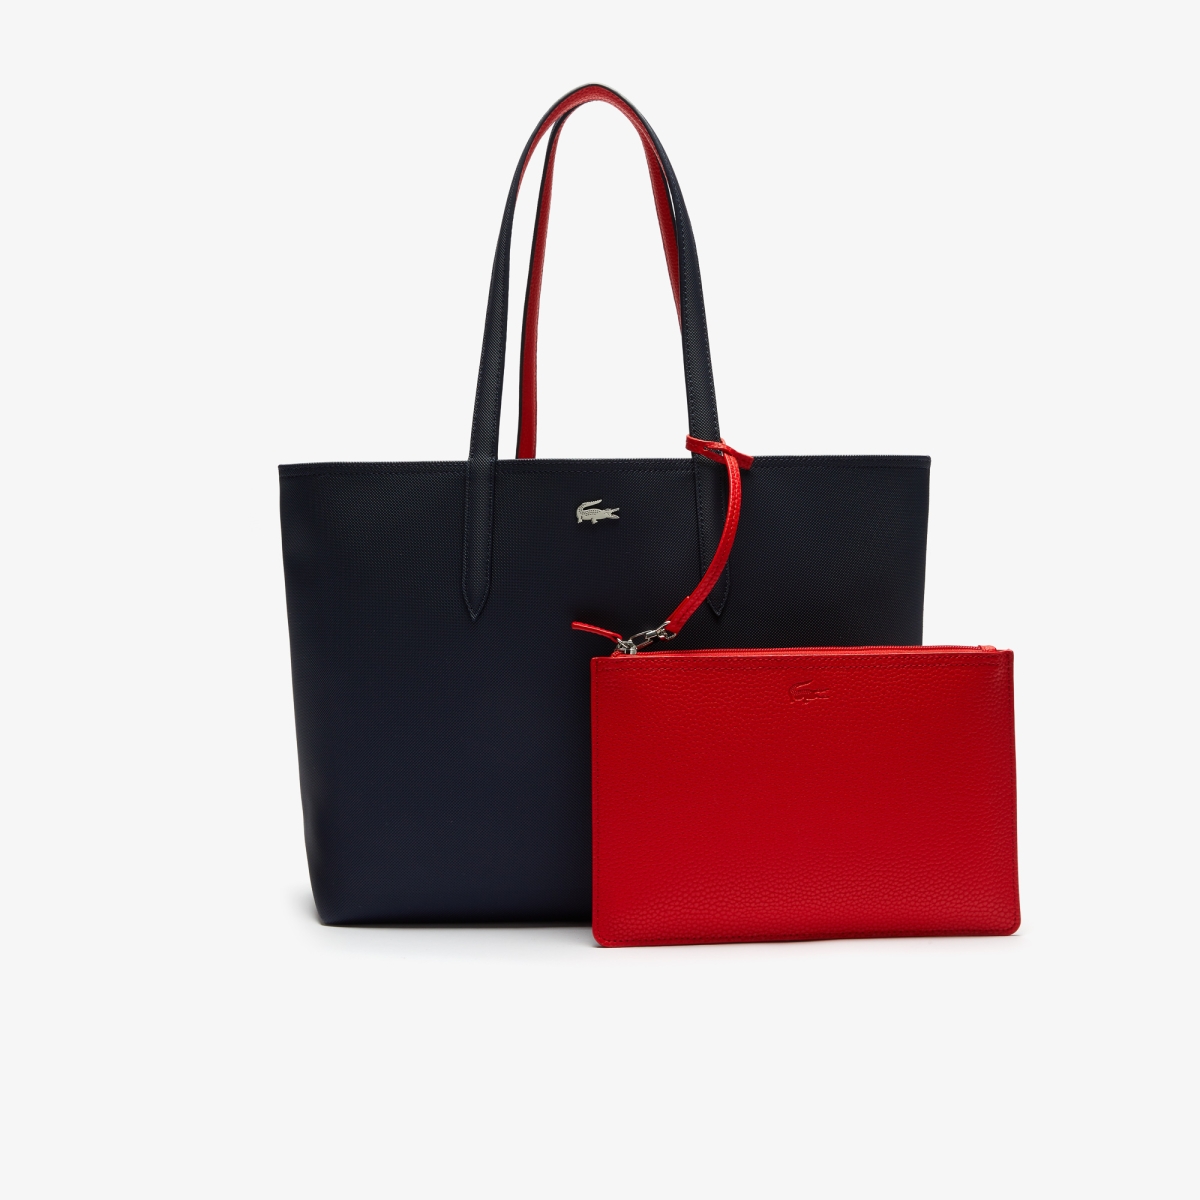 Lacoste Women's Anna Reversible Bicolor Tote Bag - One Size